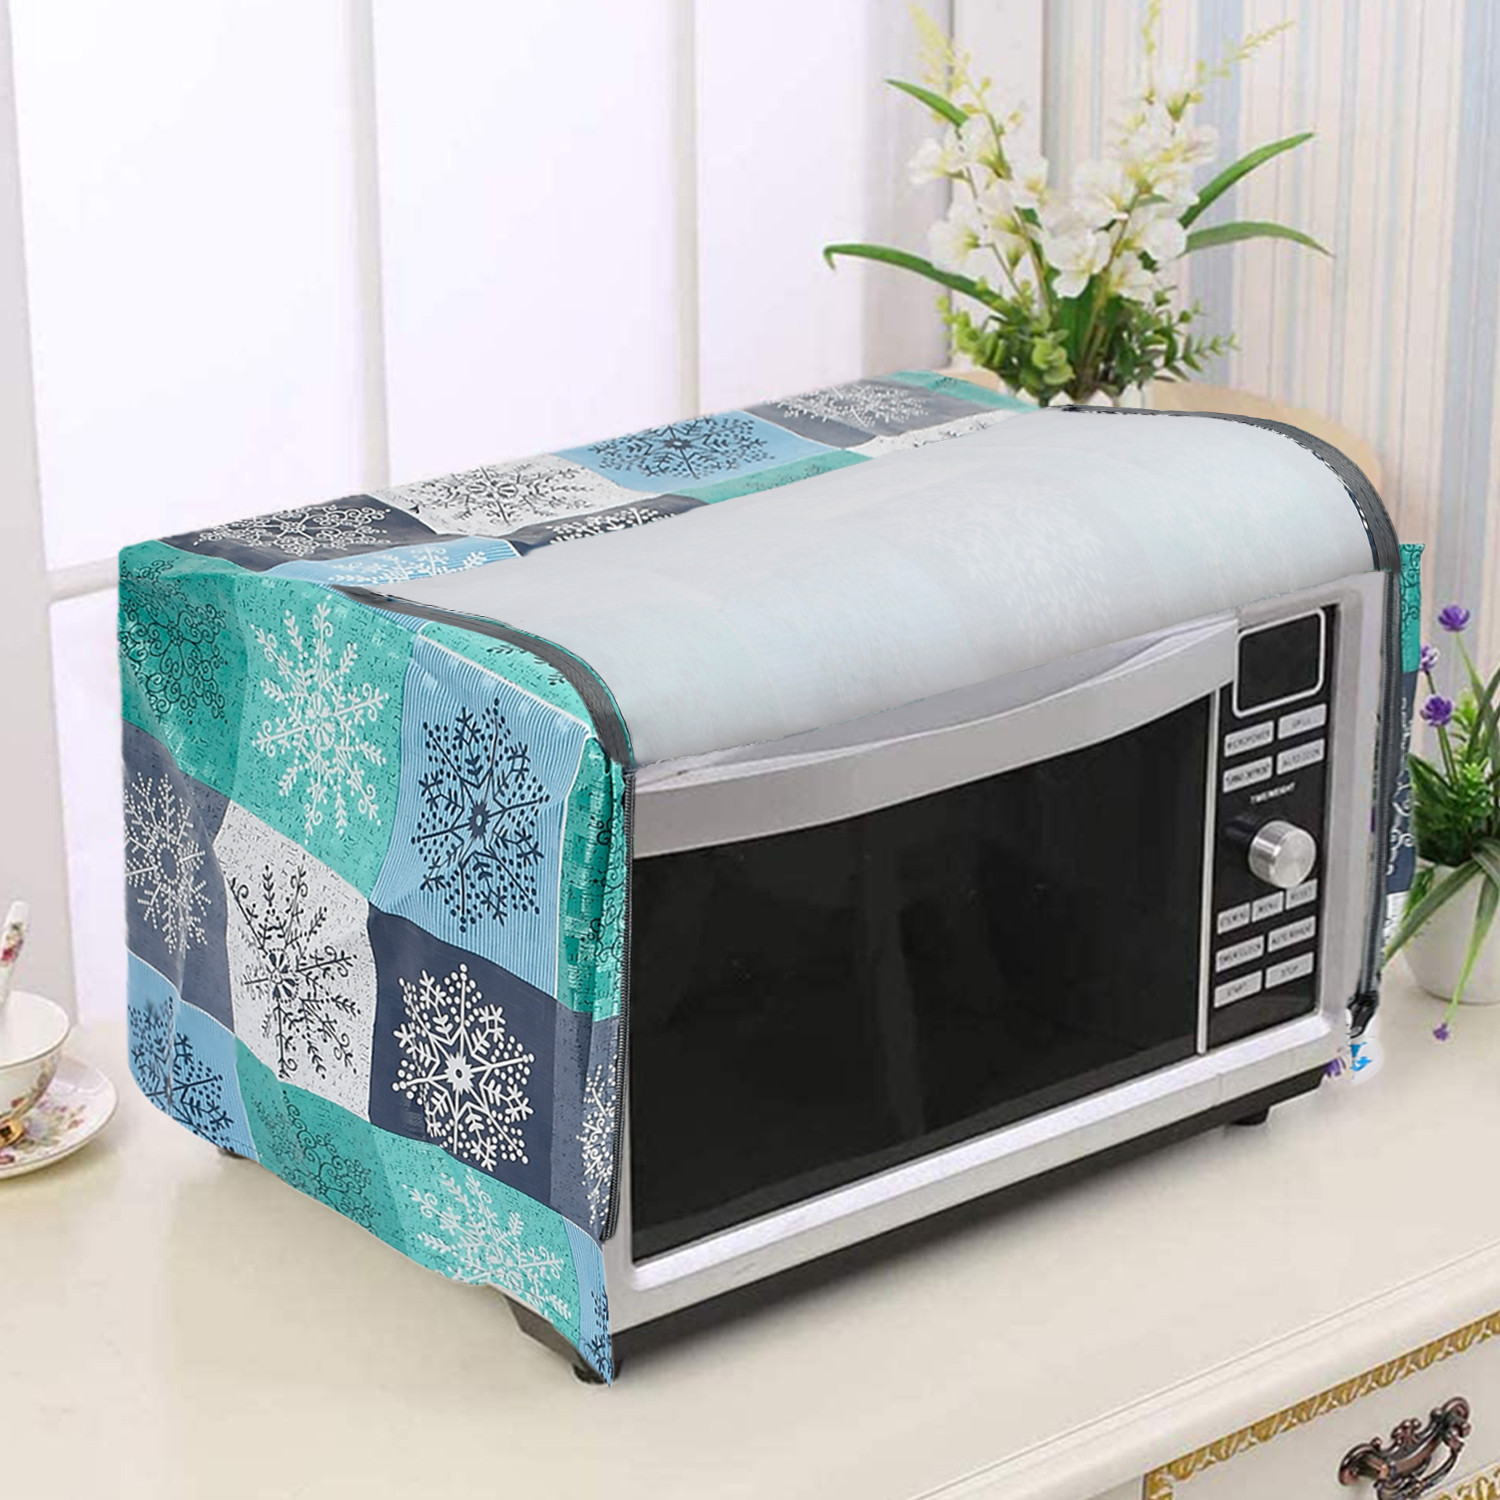 Kuber Industries PVC Check Printed Microwave Oven Cover, Dustproof Machine Protector Cover,23 Ltr. (Sky Blue)